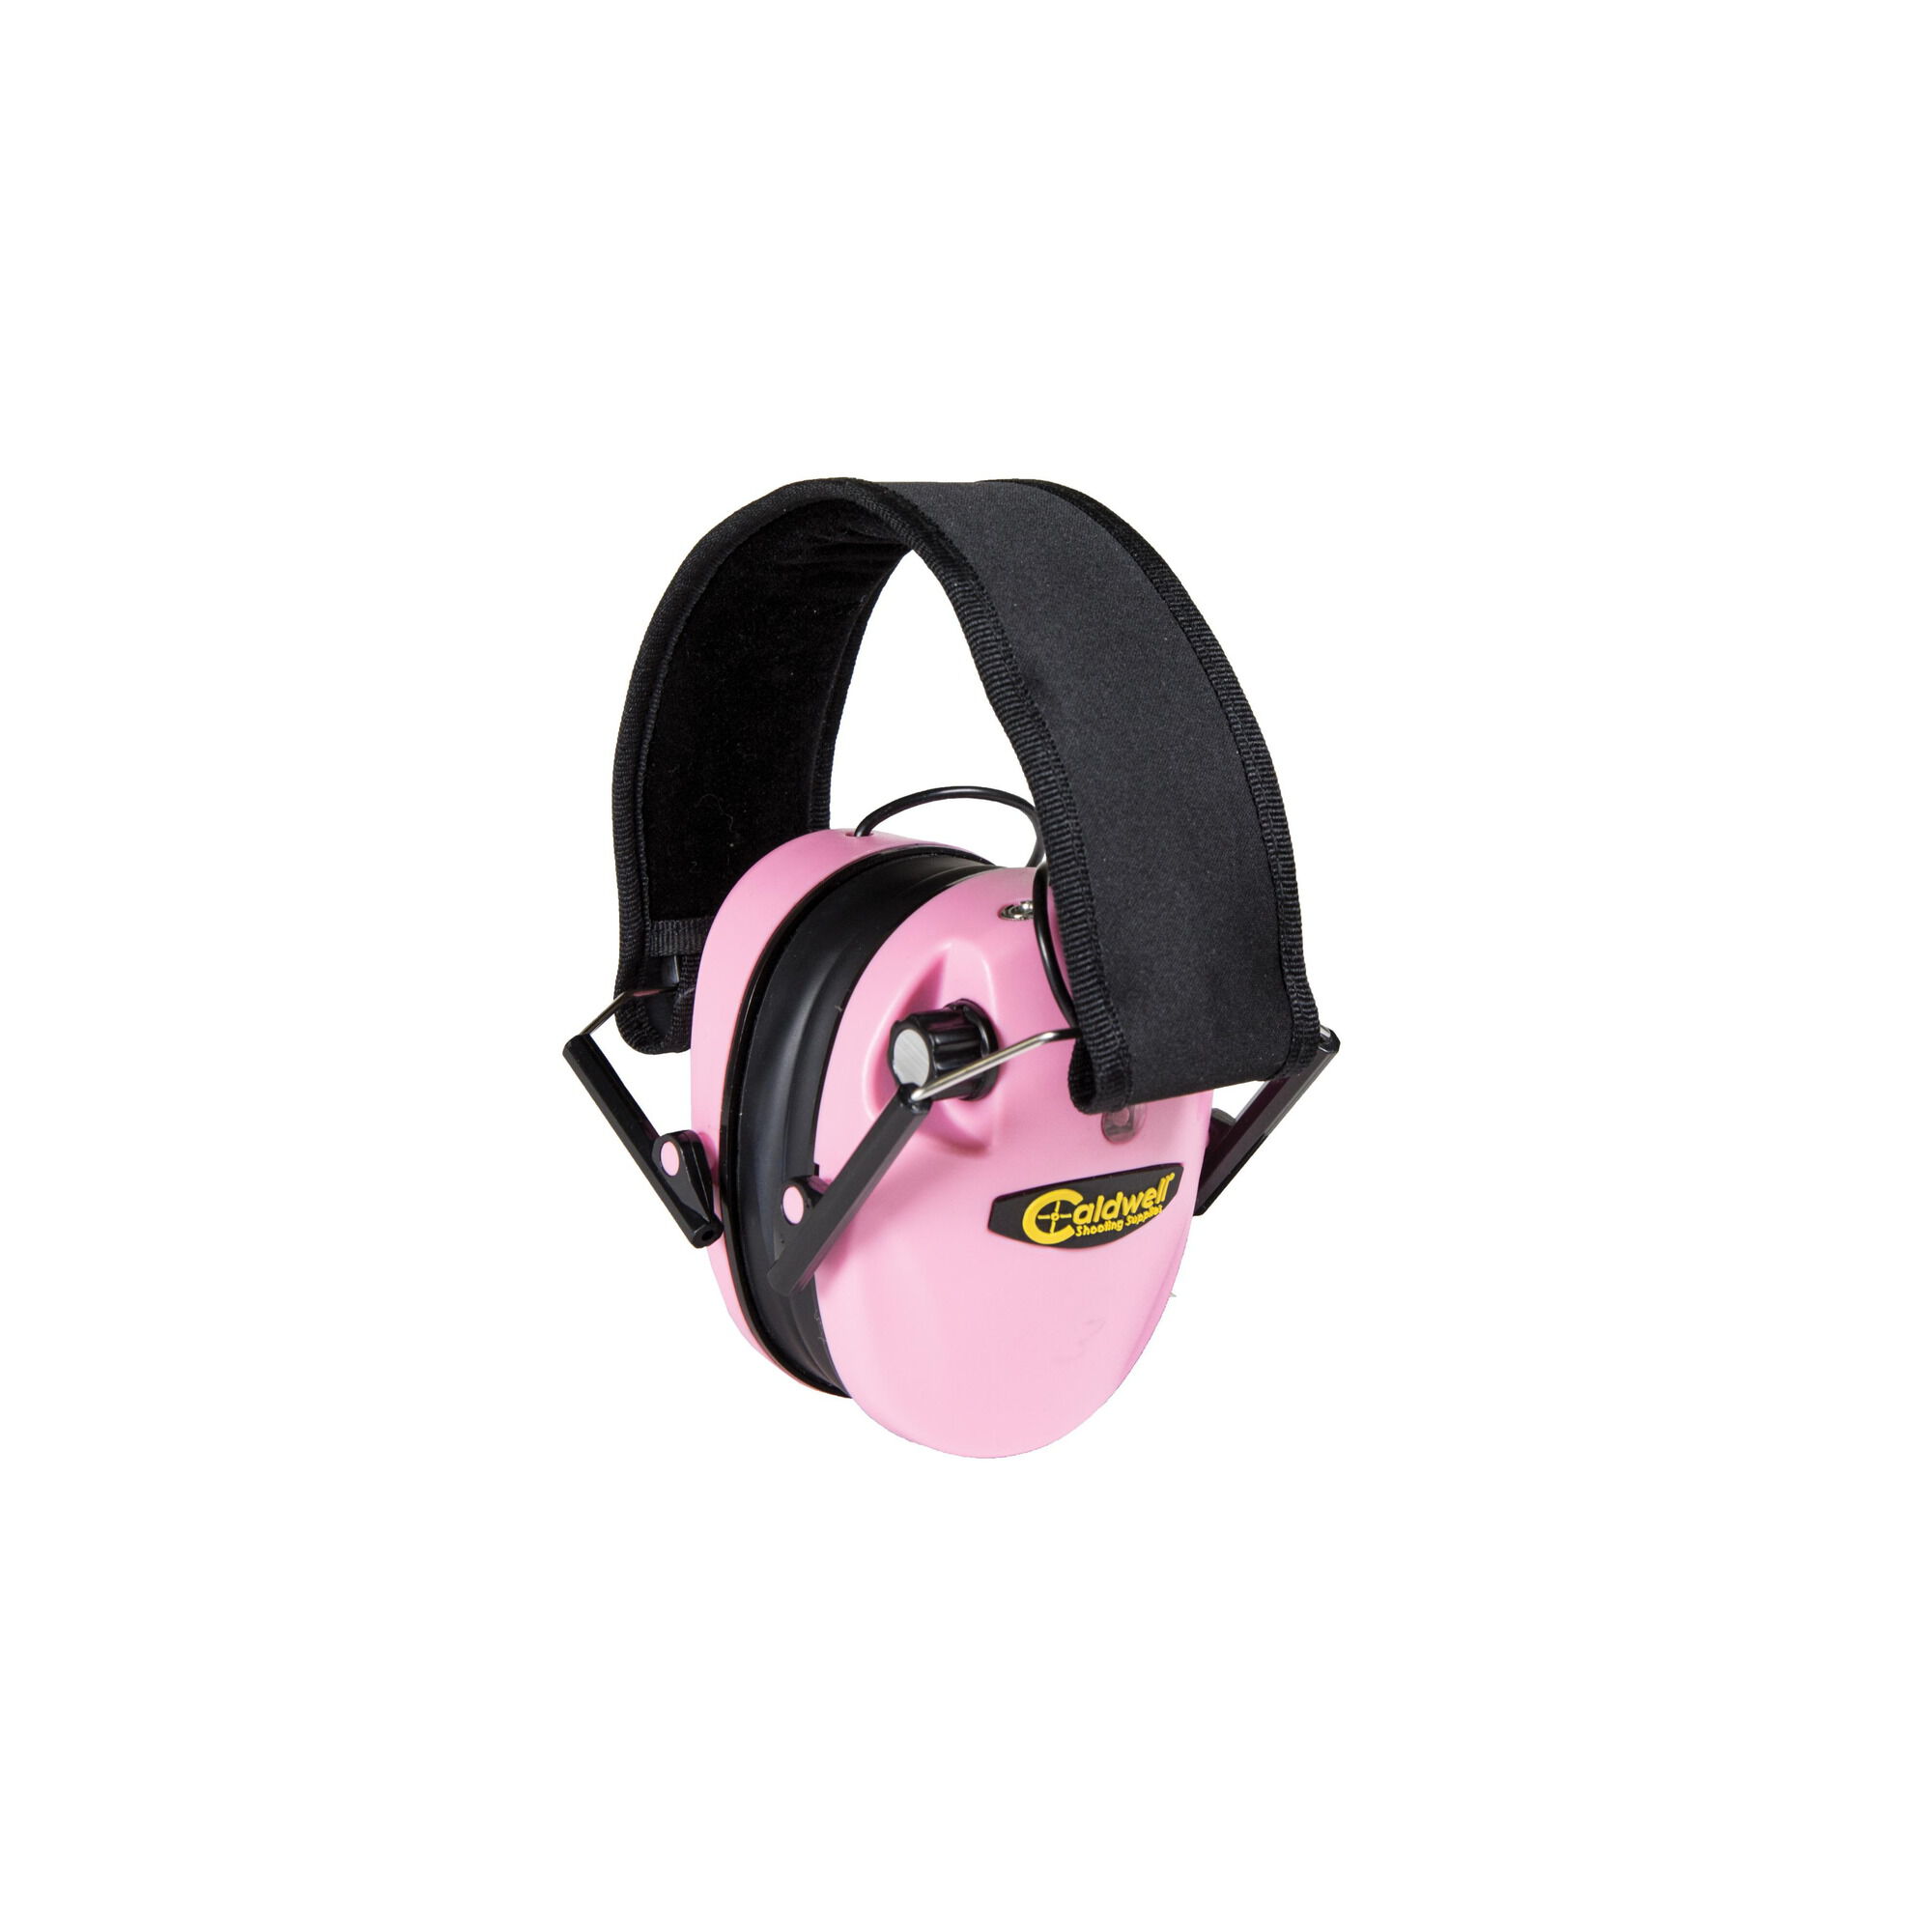 Authentic Caldwell EMAX Low Profile Electronic Ear Muffs Model New 487111 Pink 